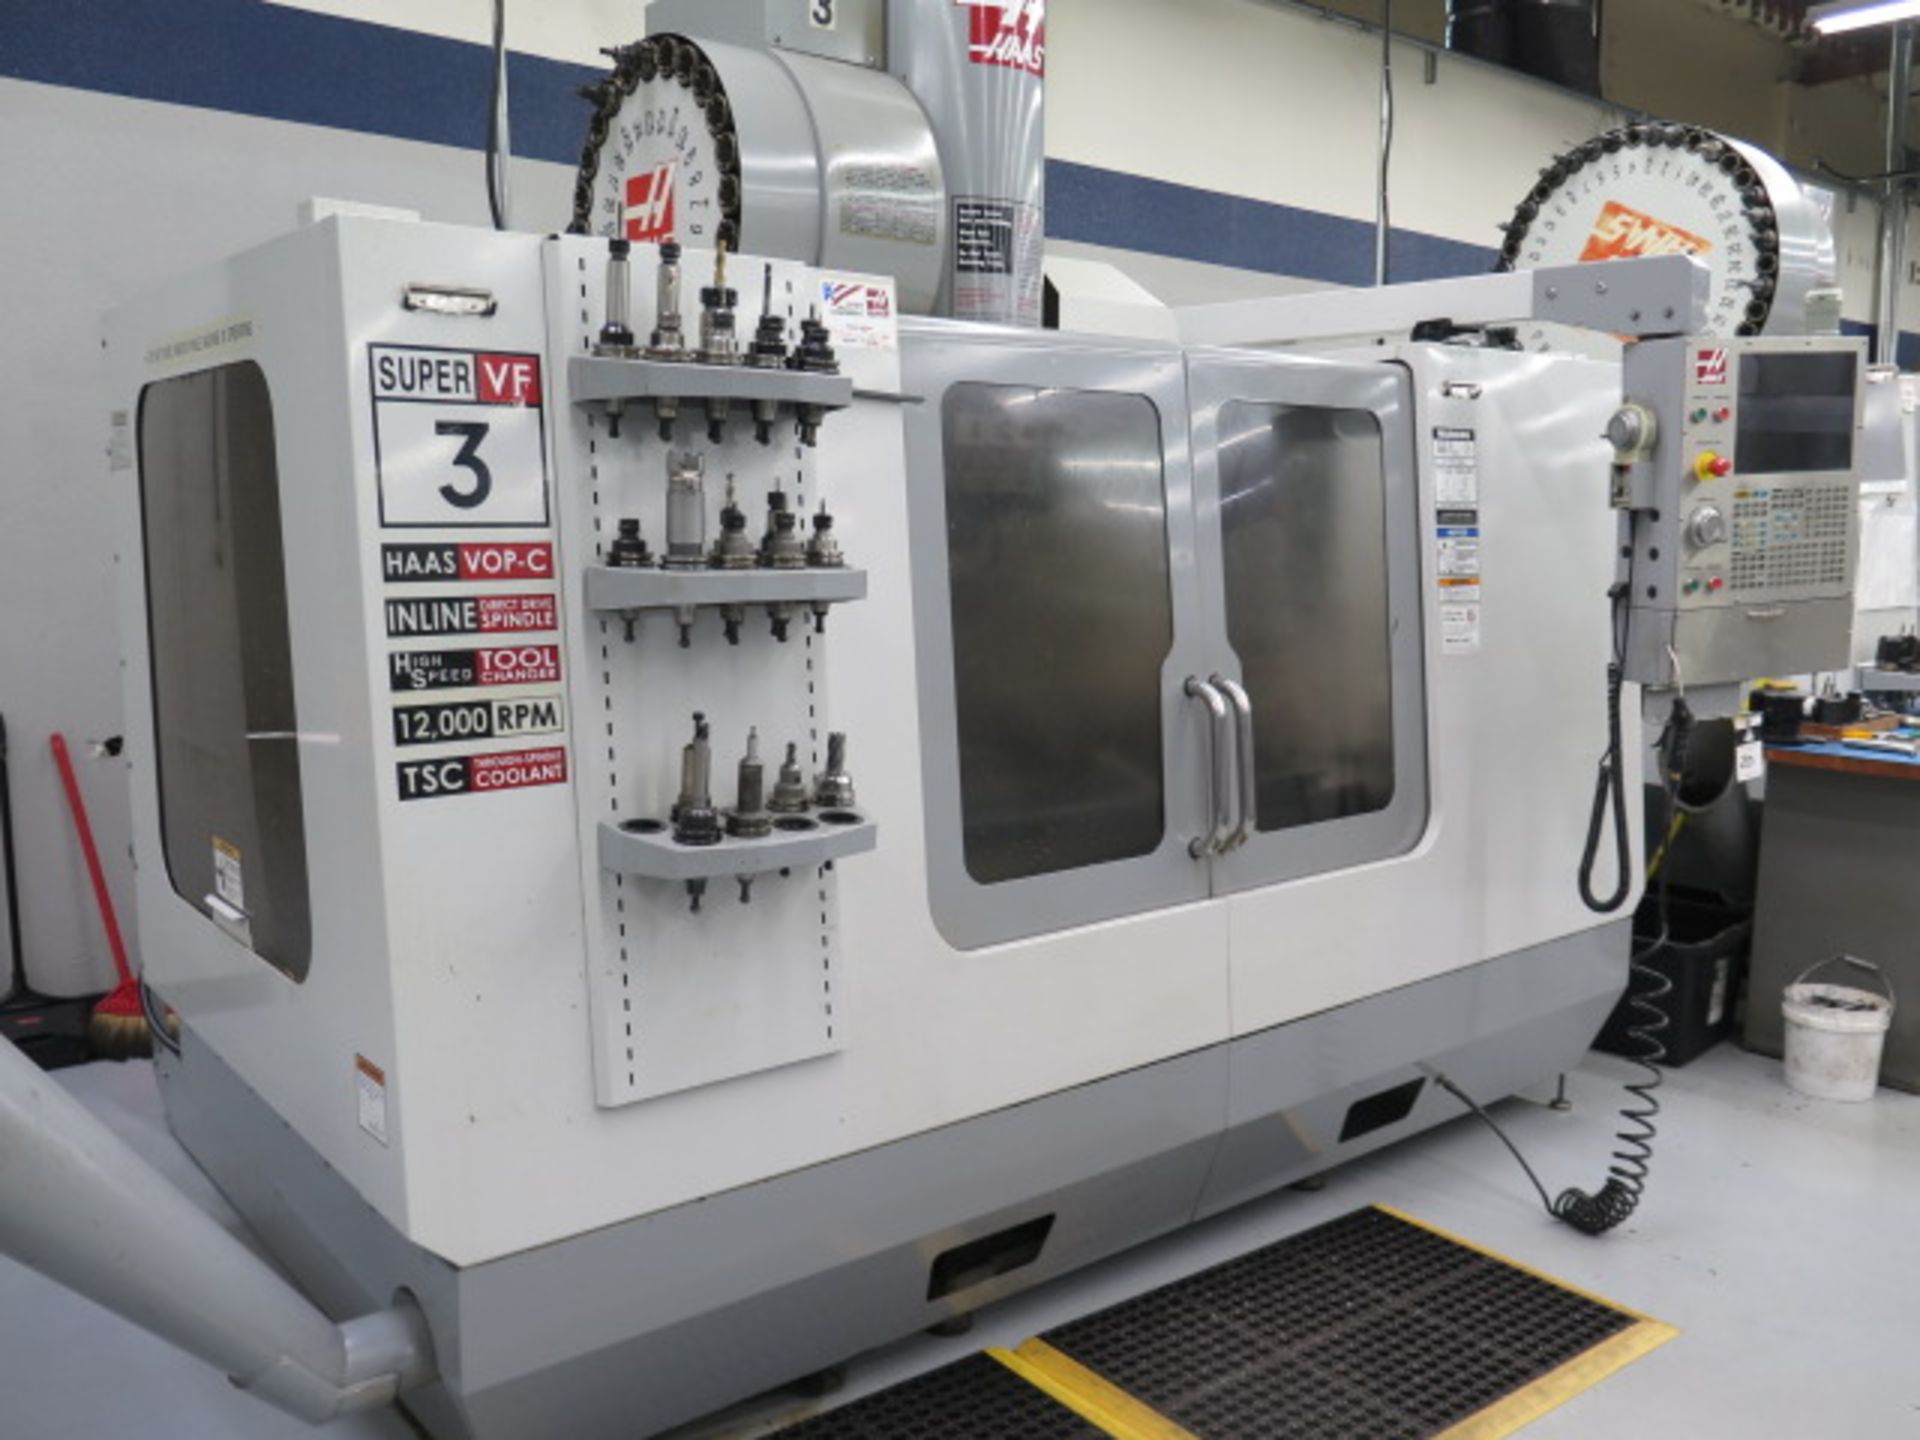 2007 Haas Super VF-3SS CNC VMC s/n 1055001 w/ Haas Controls, Hand Wheel, SOLD AS IS - Image 2 of 17